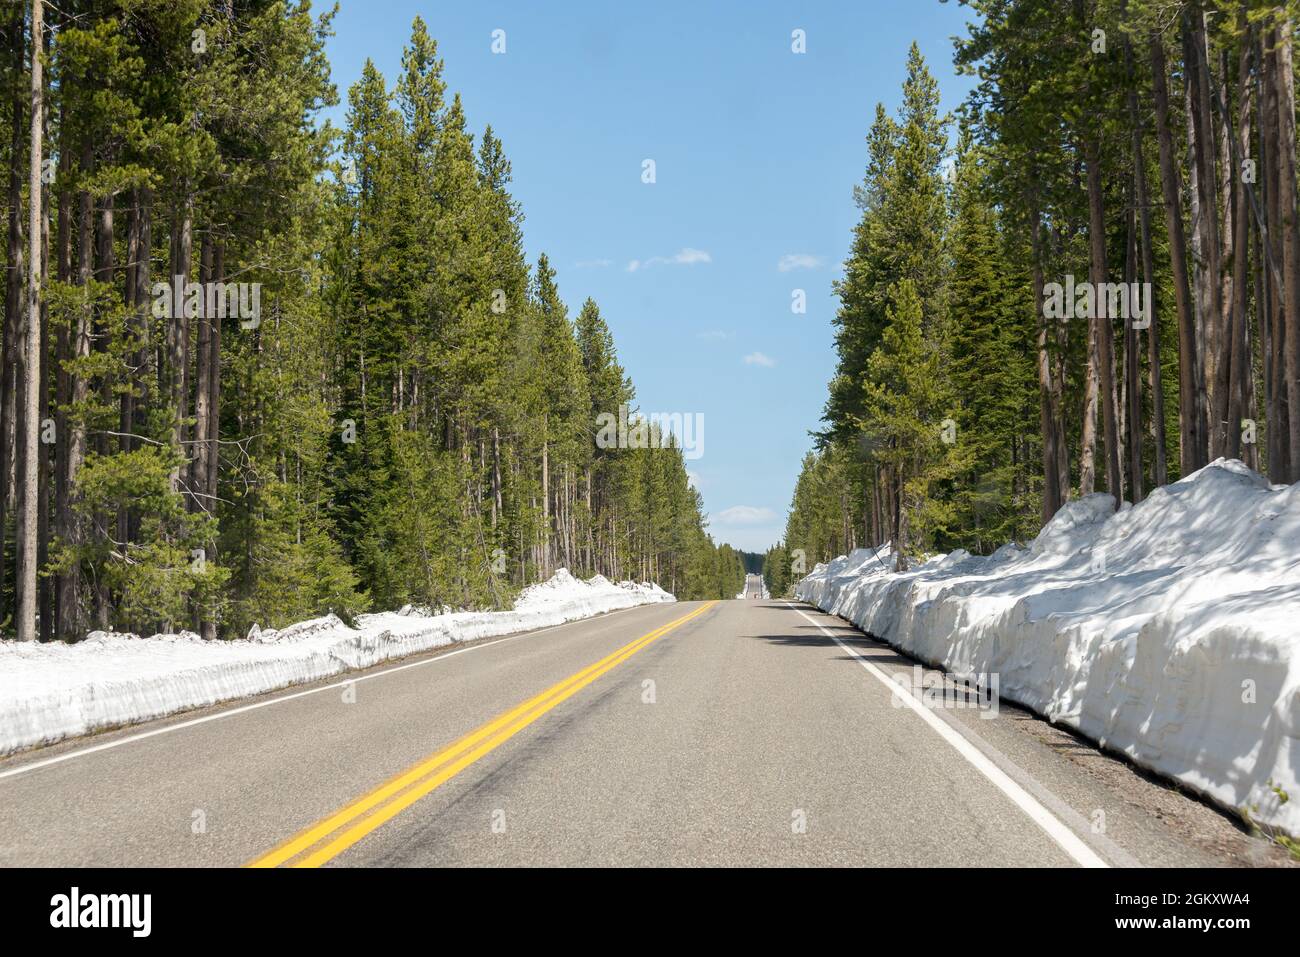 Entering to Yellowstone National Park from the south, with a road surrounded by 1 meter of snow and a line of trees on each side. Wyoming, United Stat Stock Photo